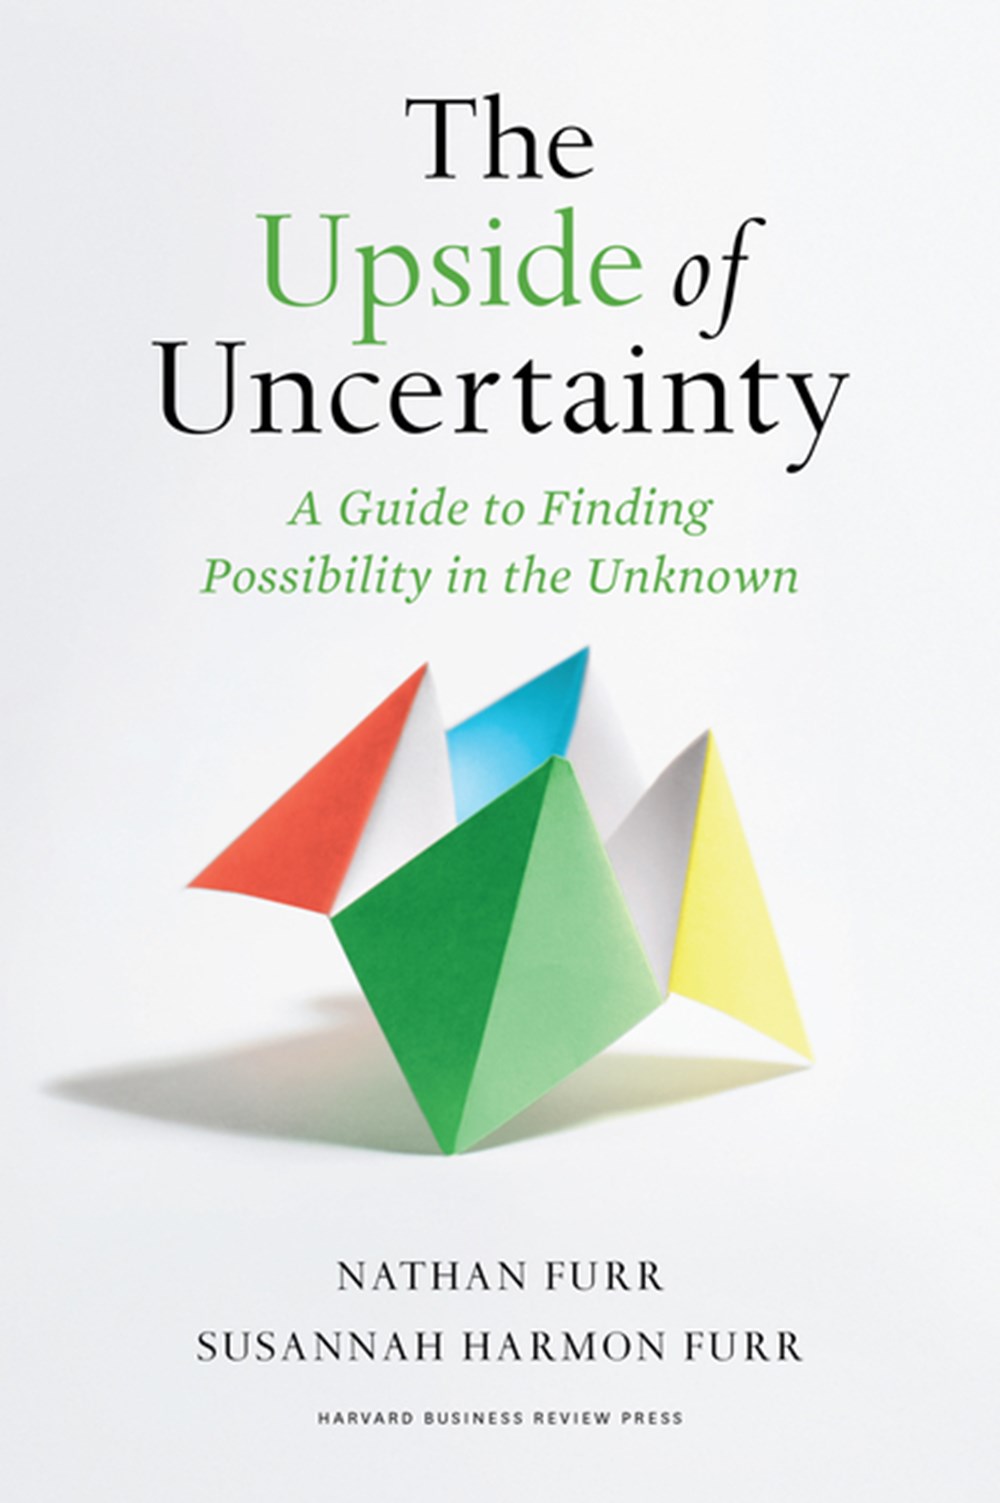 Upside of Uncertainty: A Guide to Finding Possibility in the Unknown